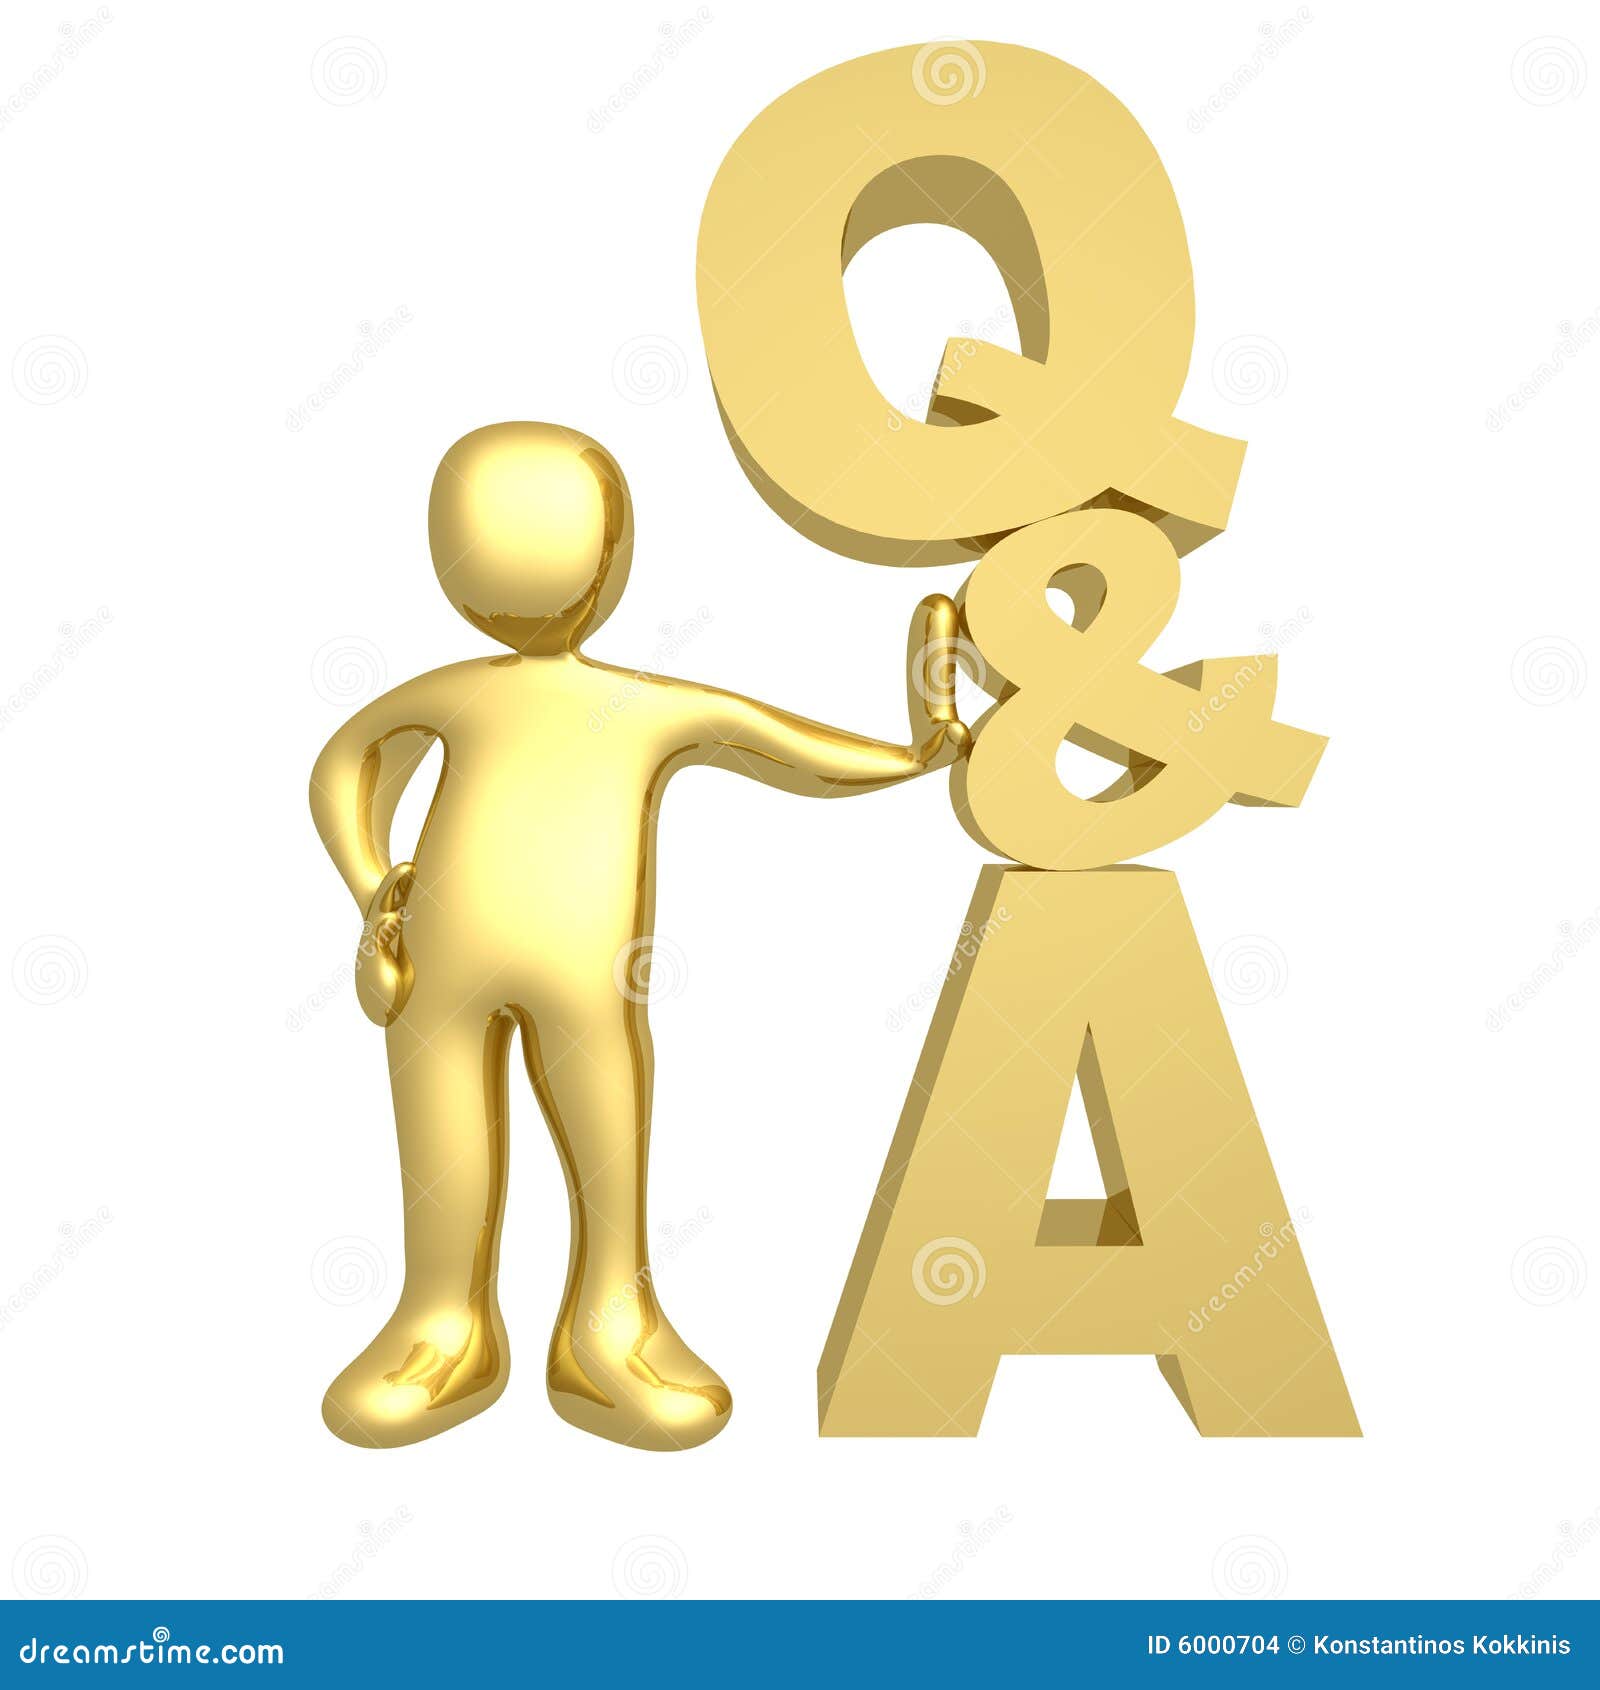 question and answer clipart - photo #7